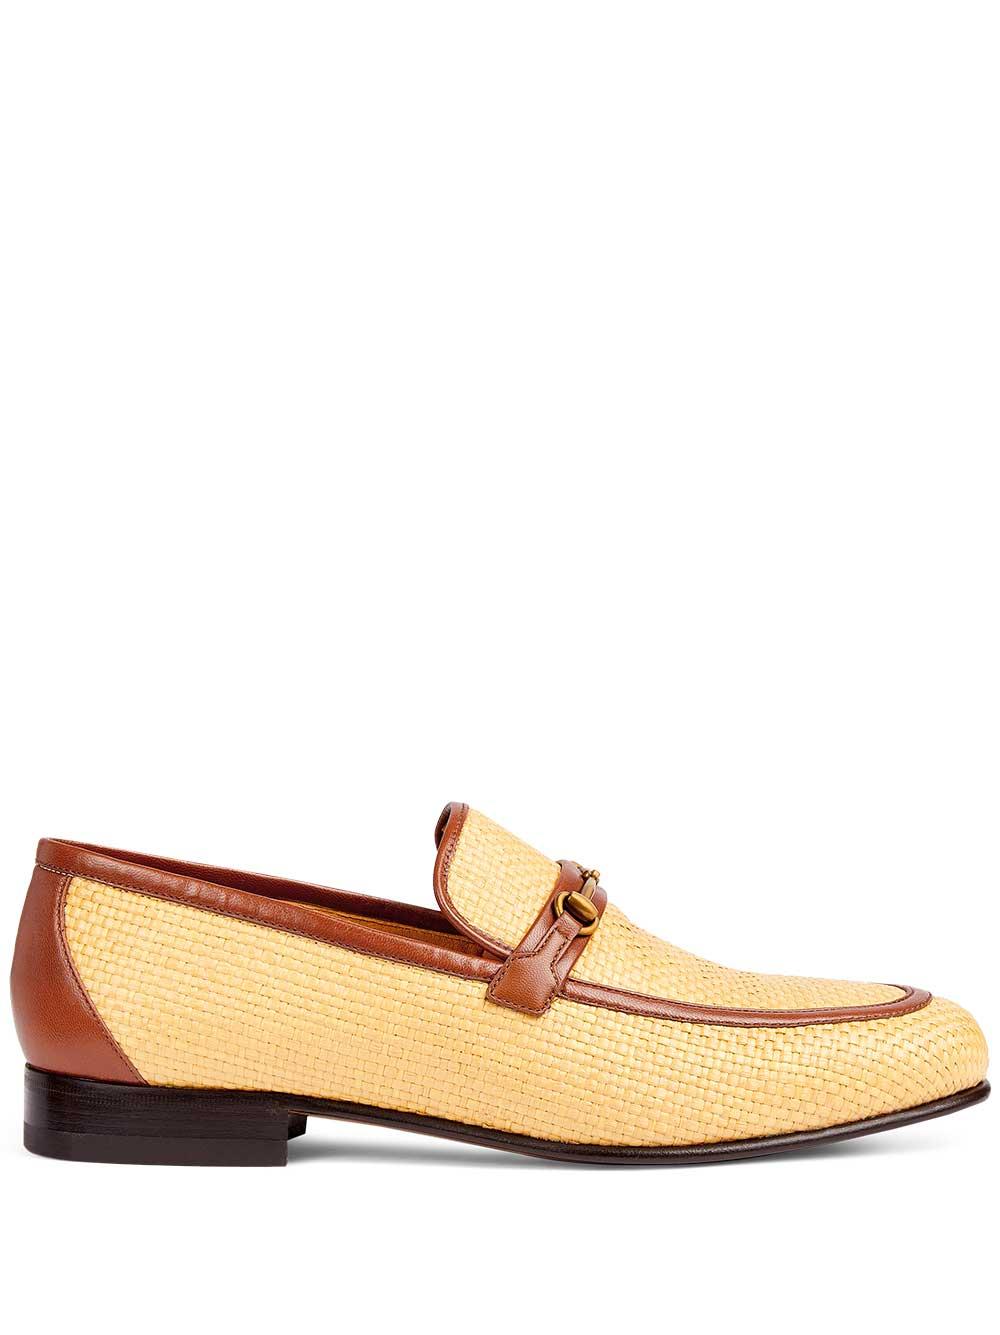 Gucci Straw Loafers in Natural for Men | Lyst